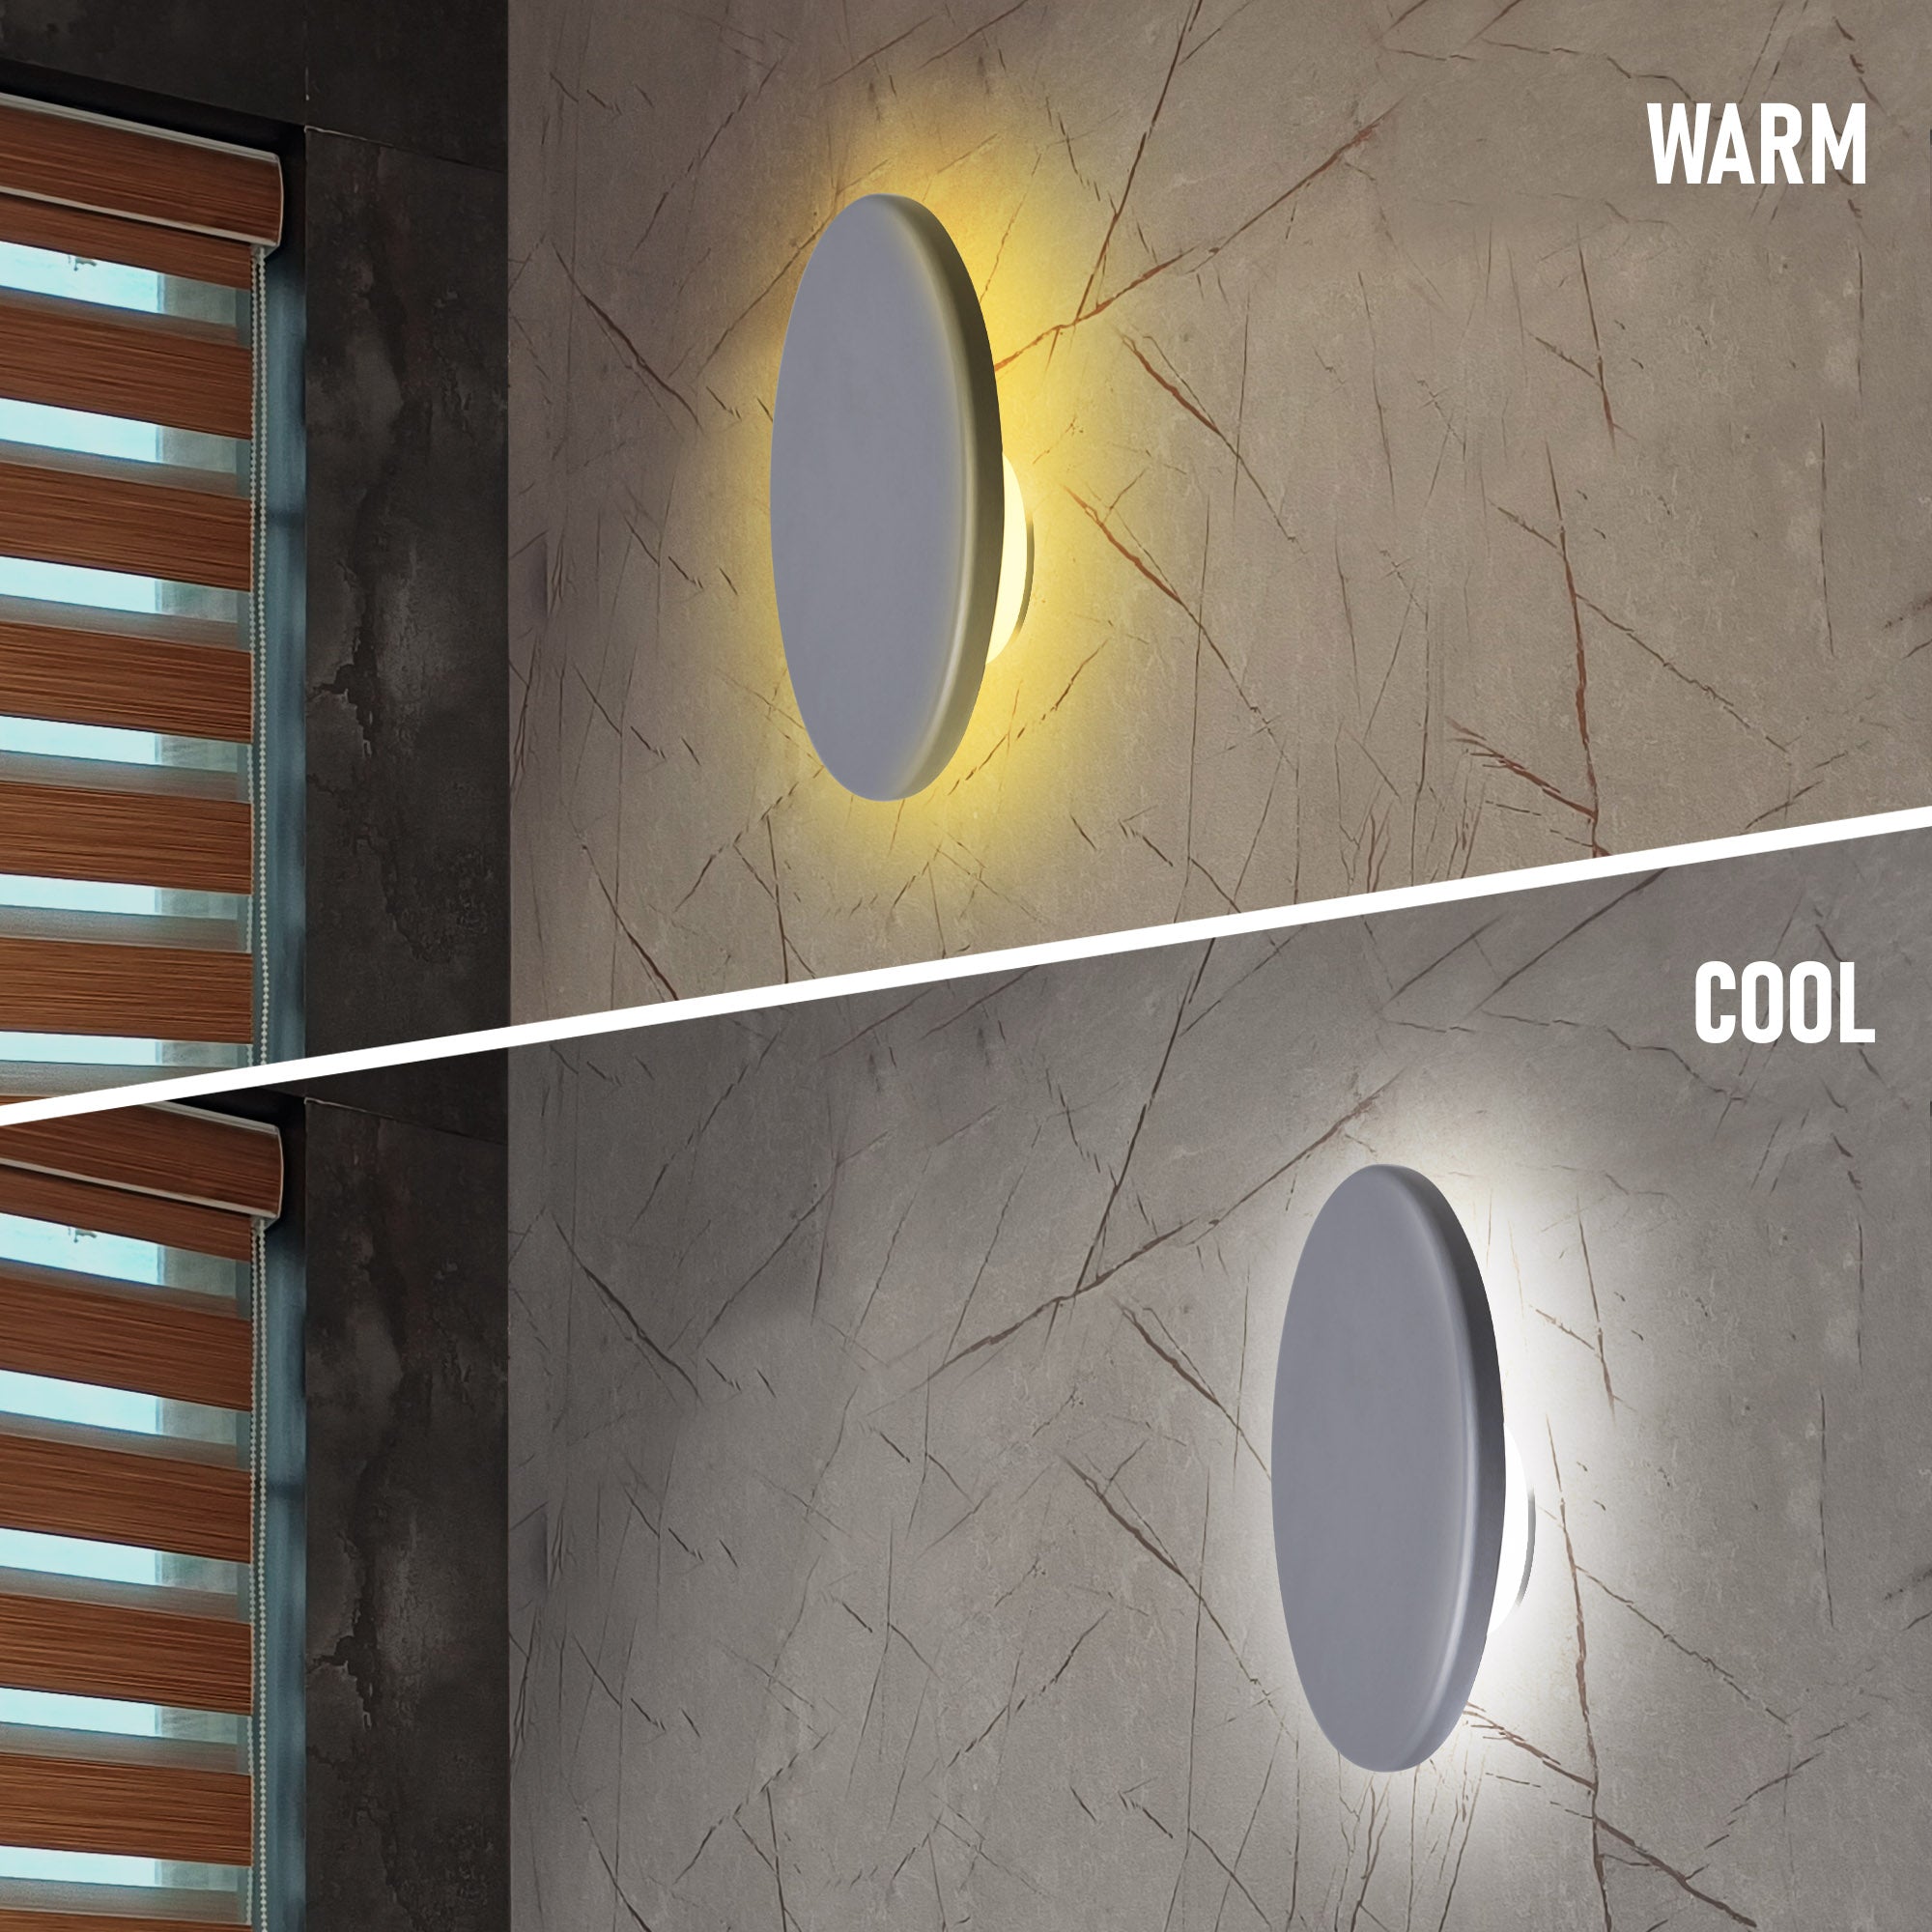 Cool and warm lighting comparison of Romy led wall light 